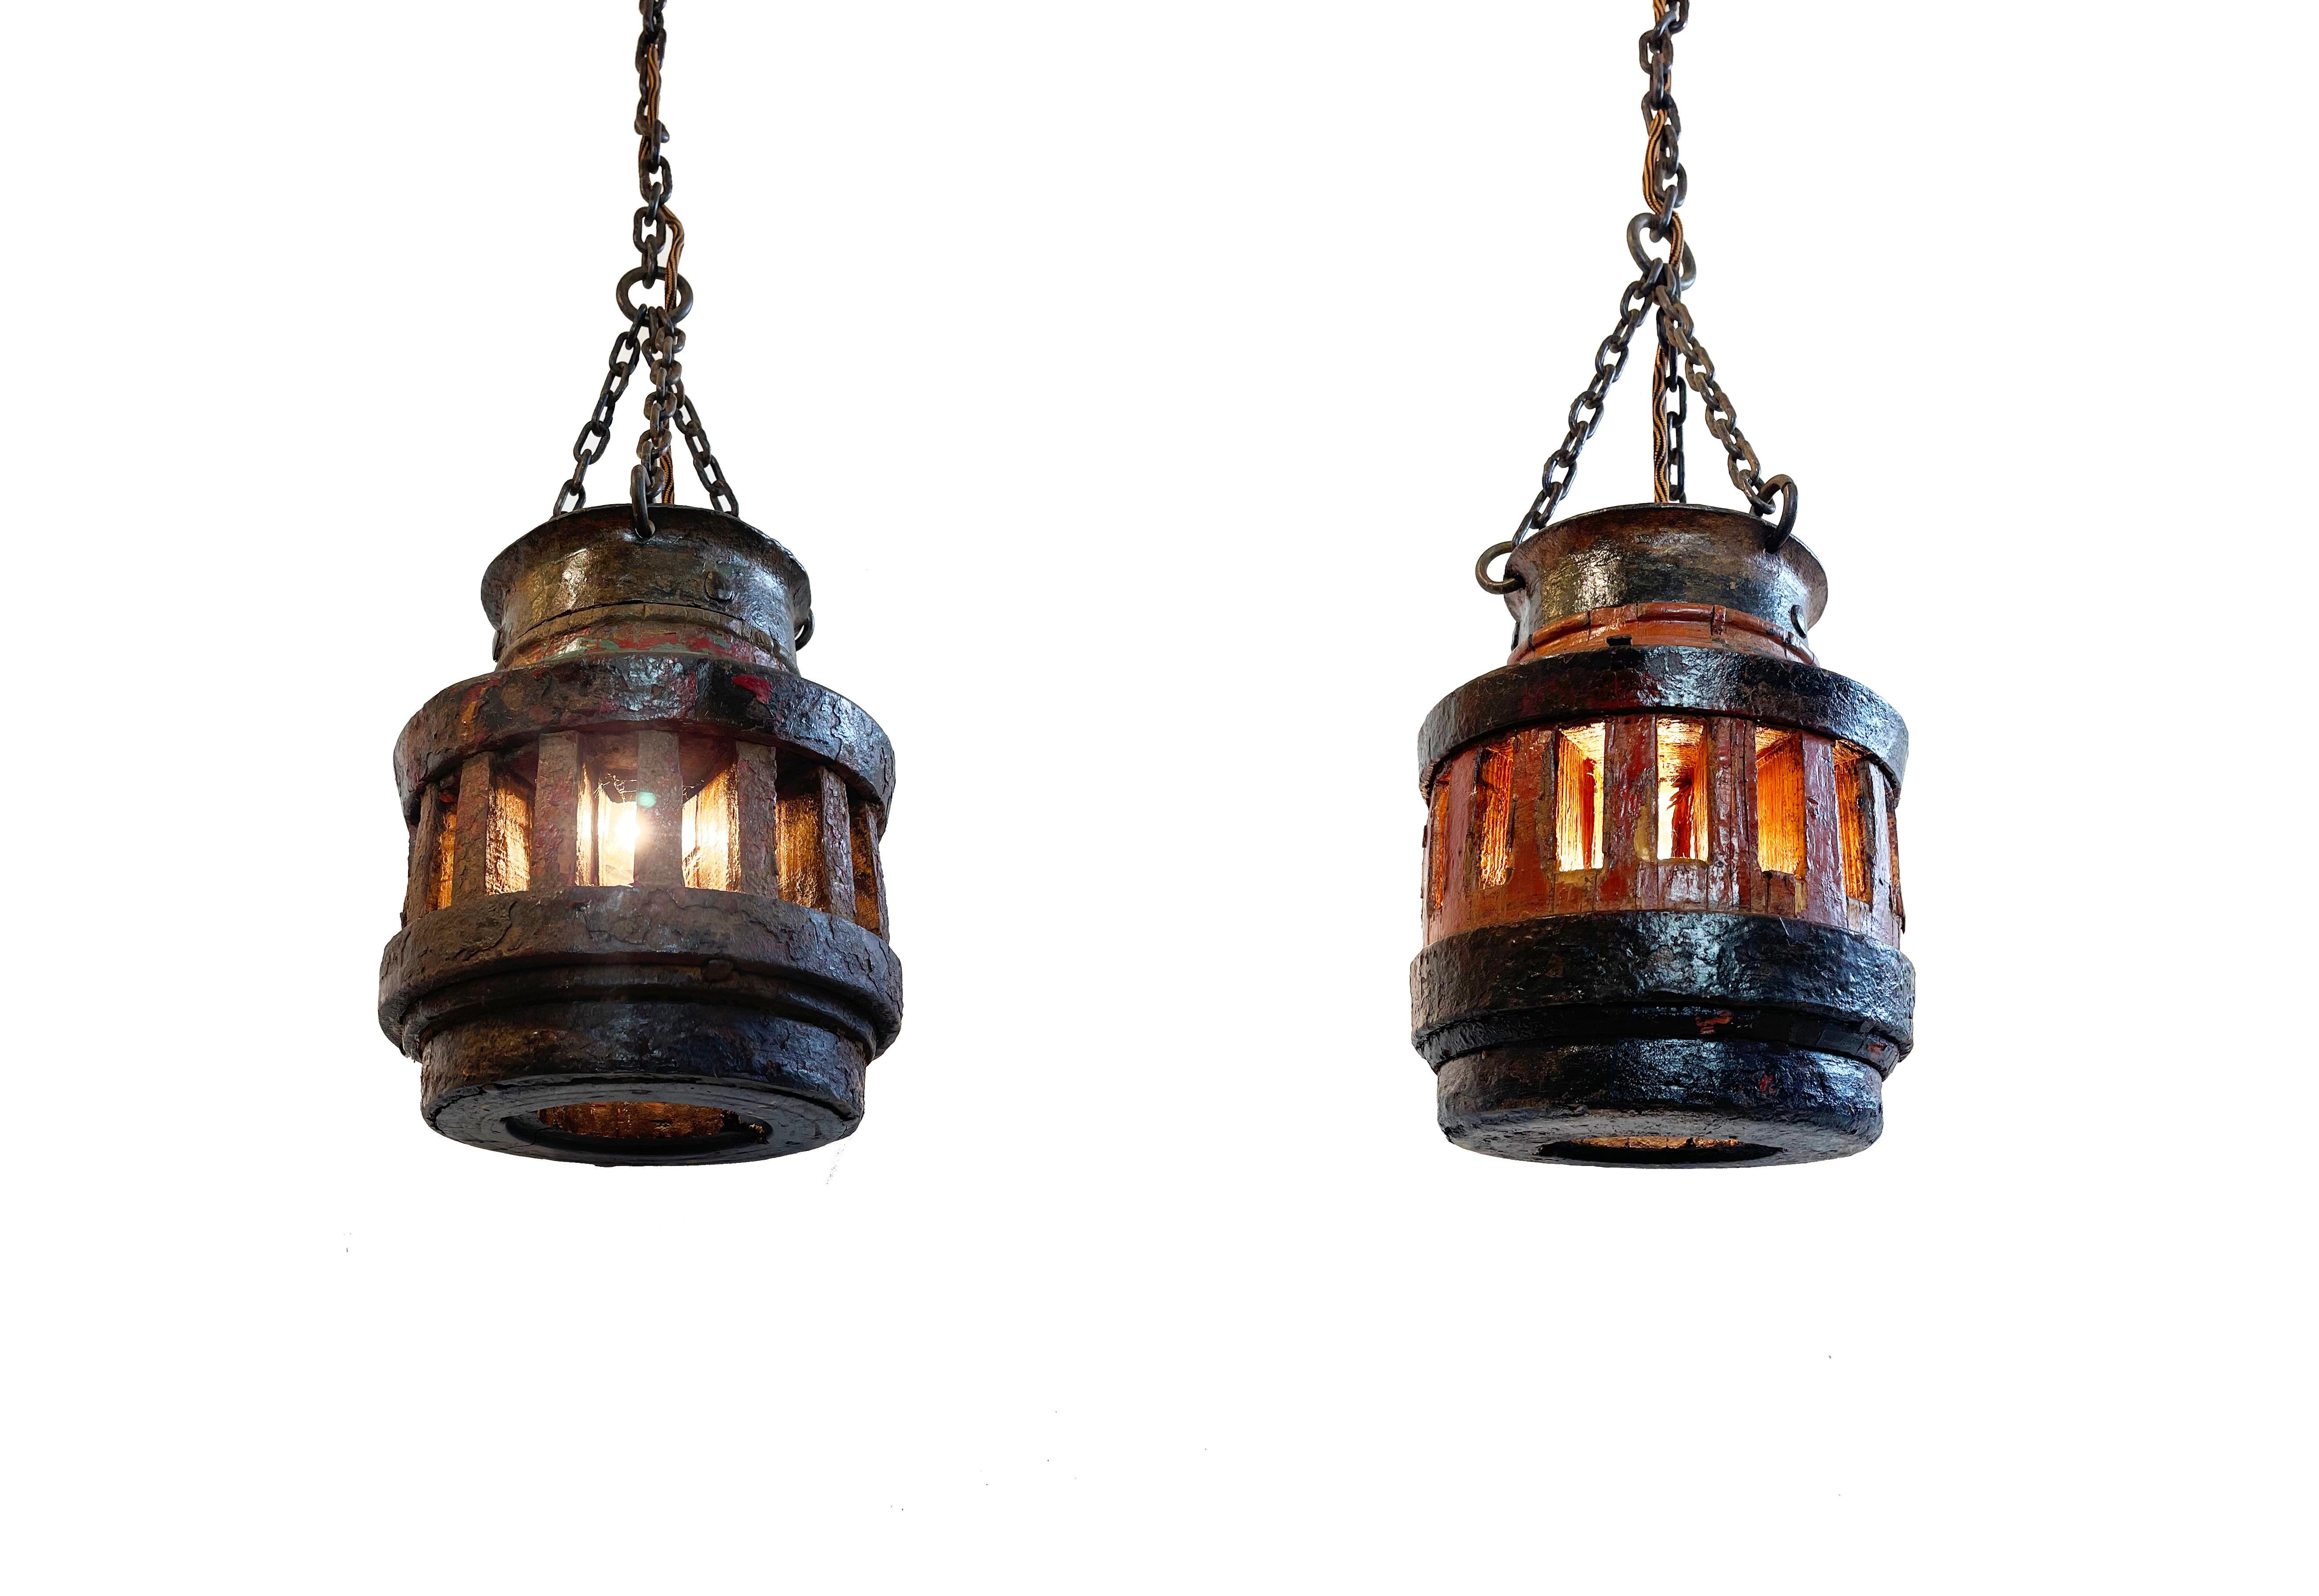 Antique wheel hubs from two different carts, converted into magnificent robust country style ceiling lamps.
Their origin will be Germany, mid 19th century.
Chunky, heavy and unique, the one hub comes with mint & rust colour, the other one in a rusty